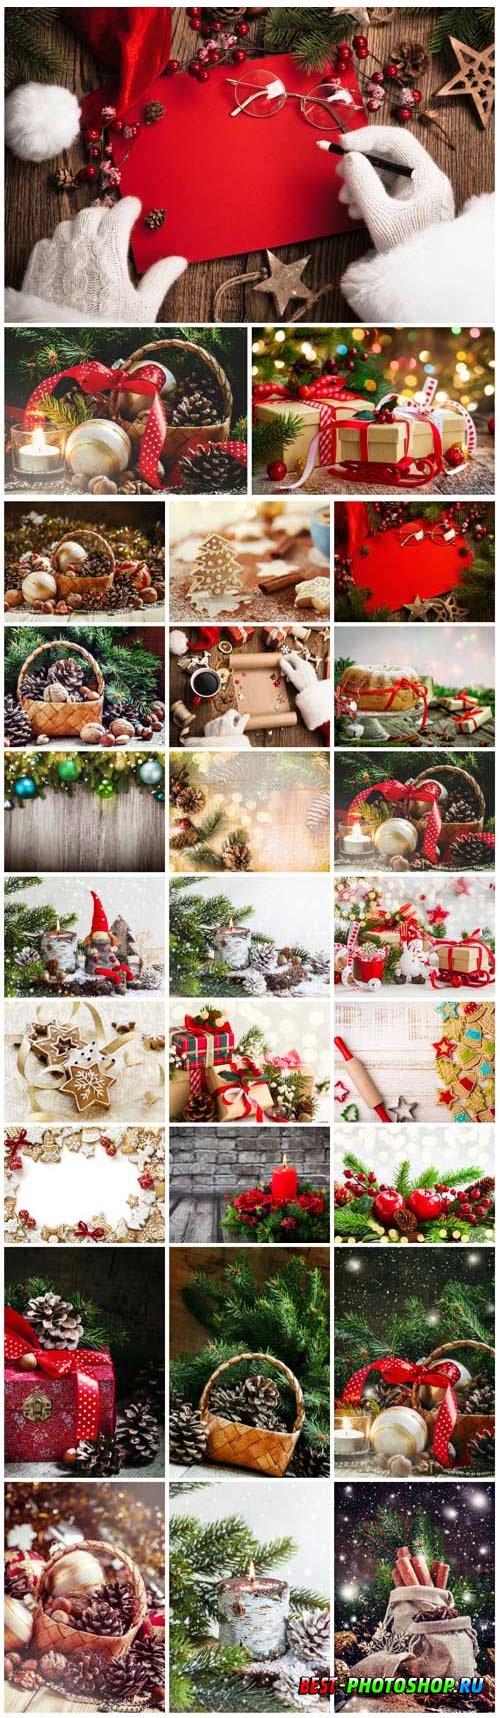 New Year and Christmas stock photos 27